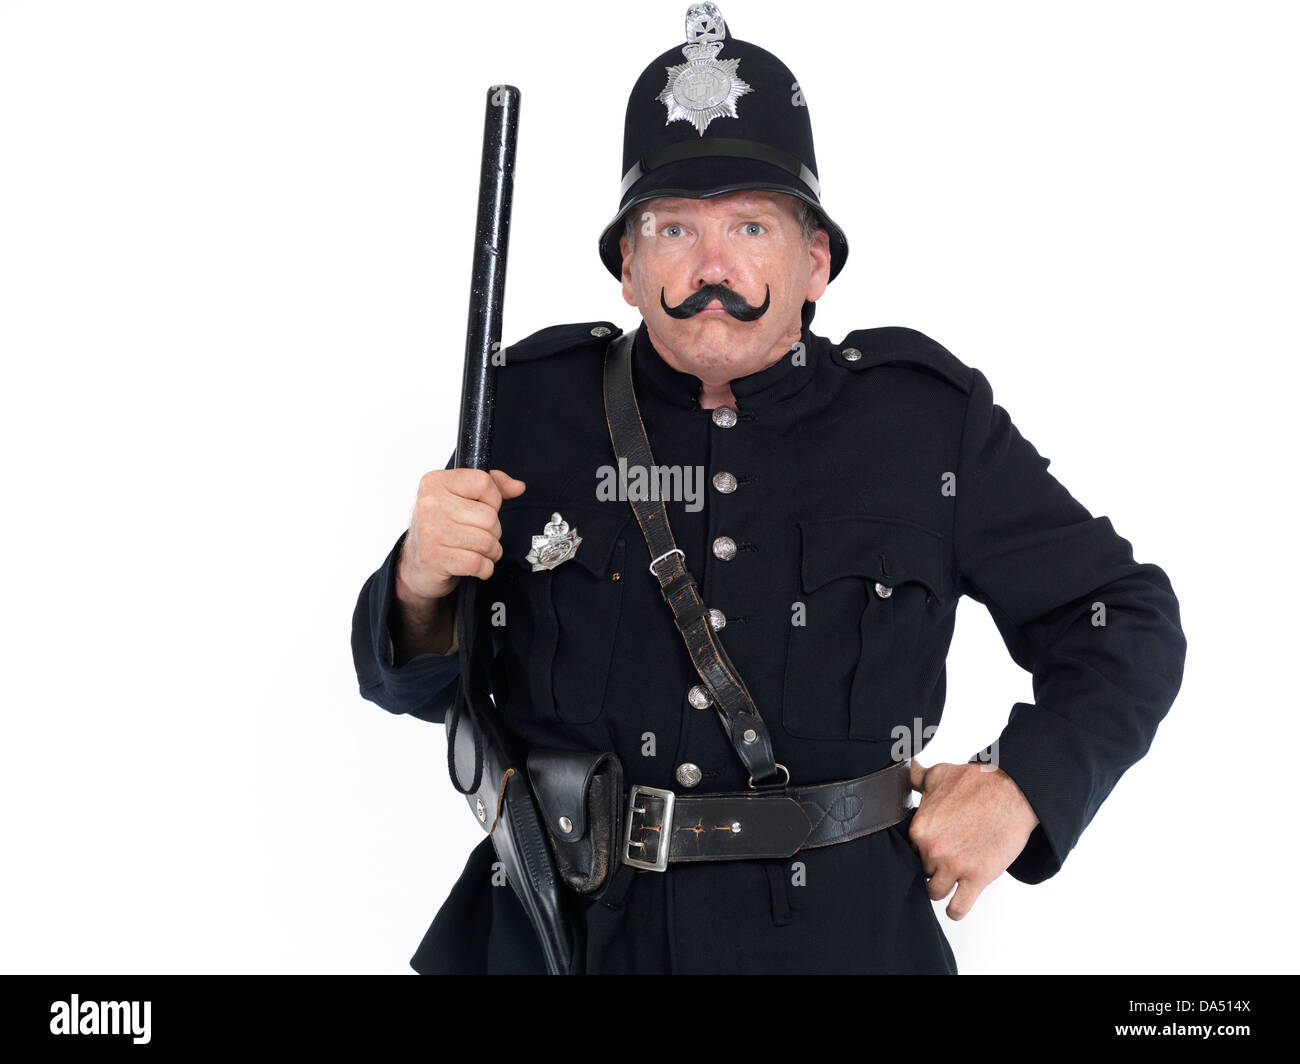 Humorous portrait of a keystone cop, vintage police officer with strict funny expression holding a baton. Isolated on white Stock Photo